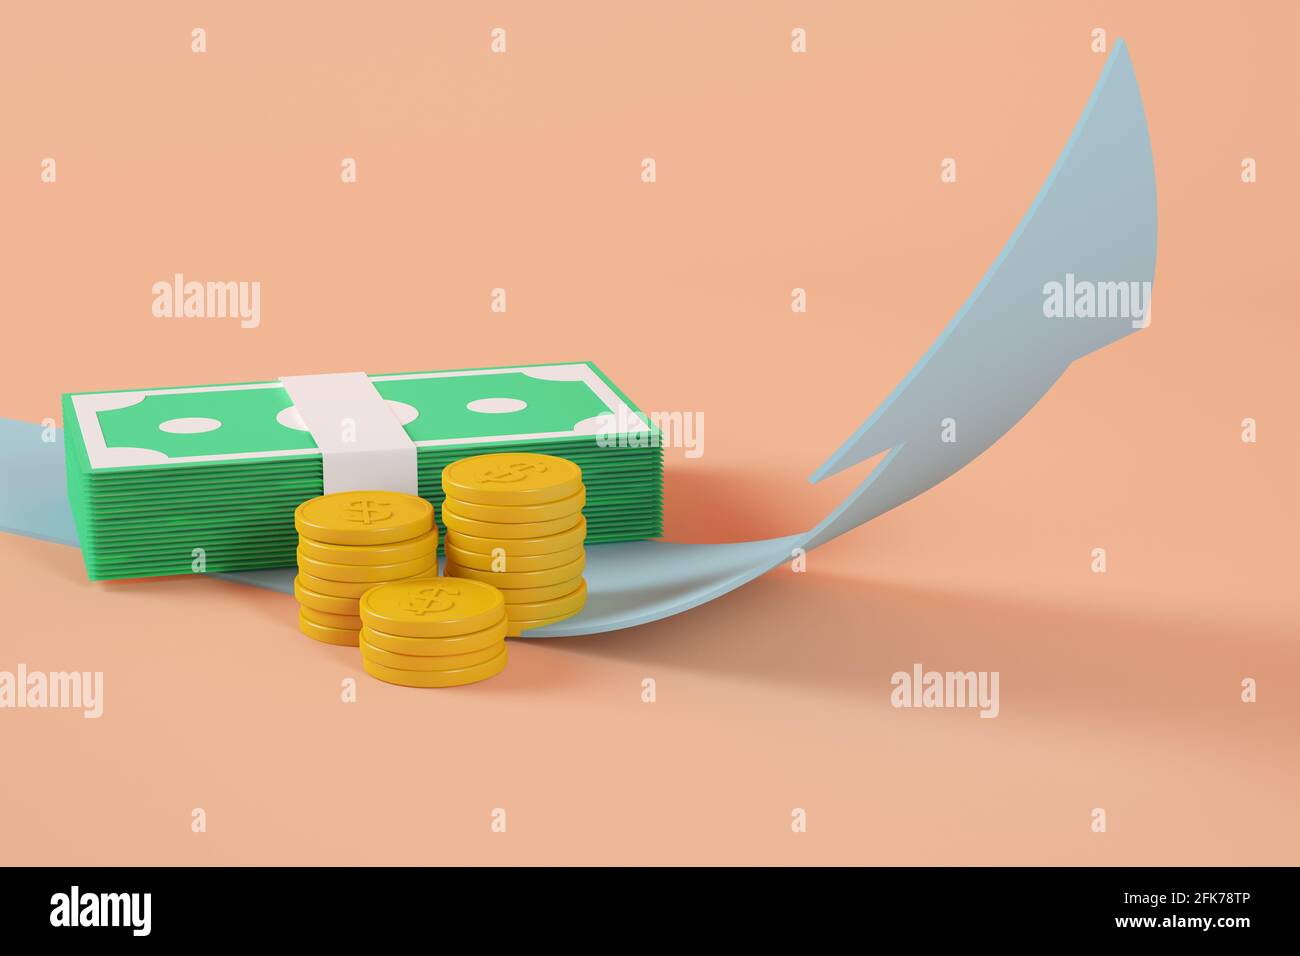 bids and coins over arrow 3d rendering concept Stock Photo